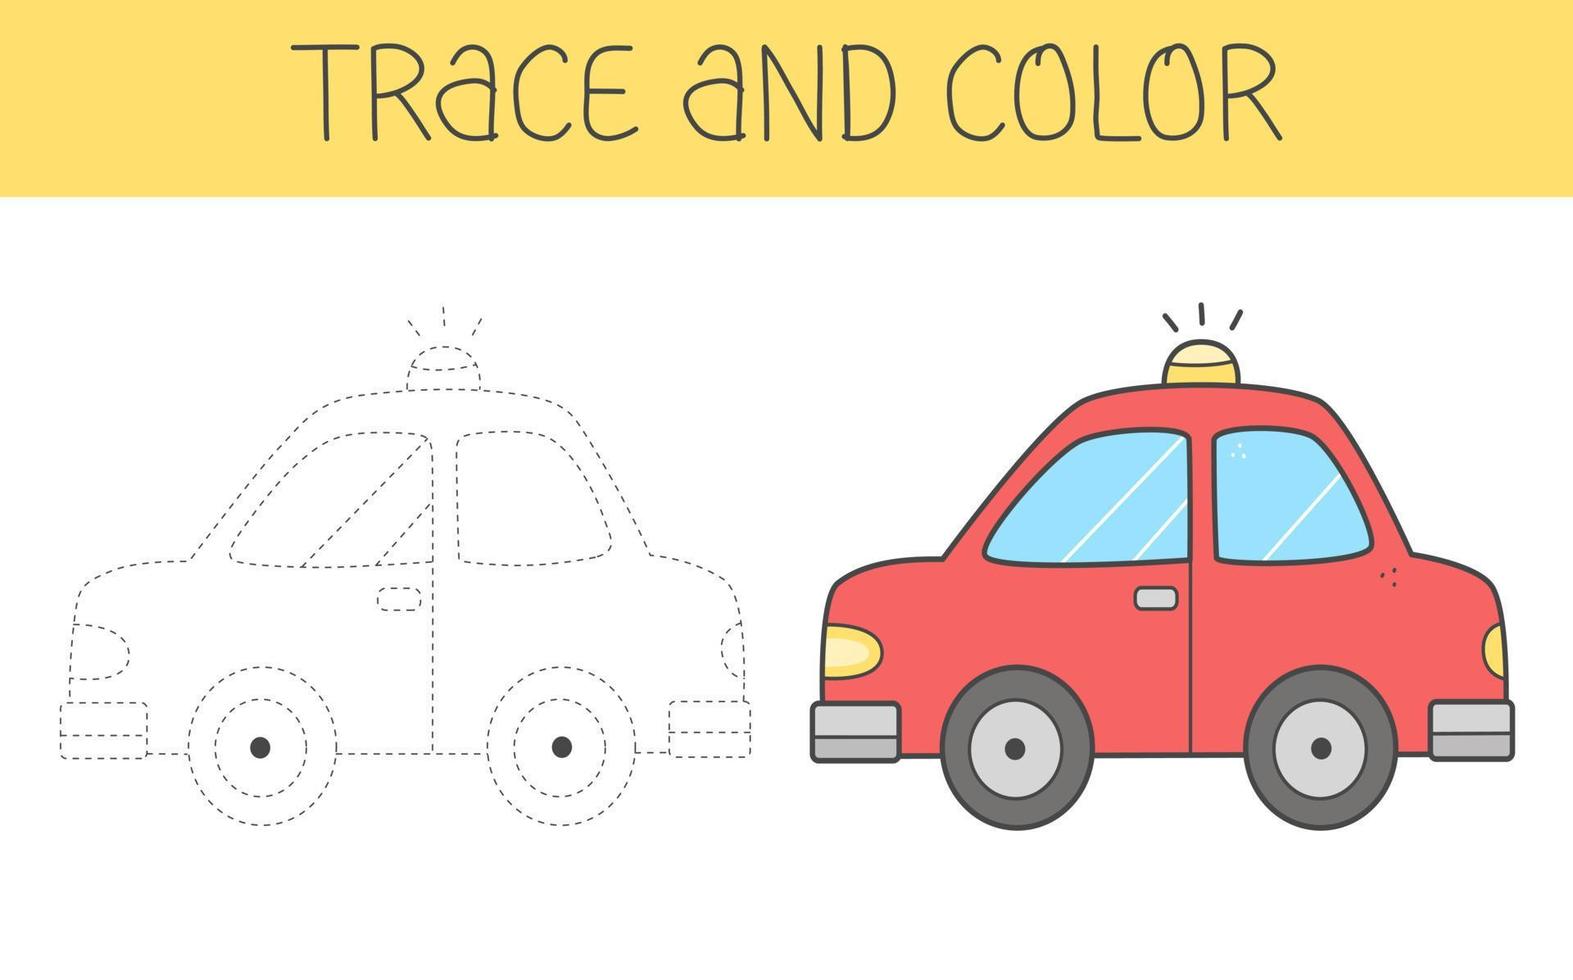 Trace and colour coloring book with car for kids. Coloring page with a cute cartoon car. Vector illustration.